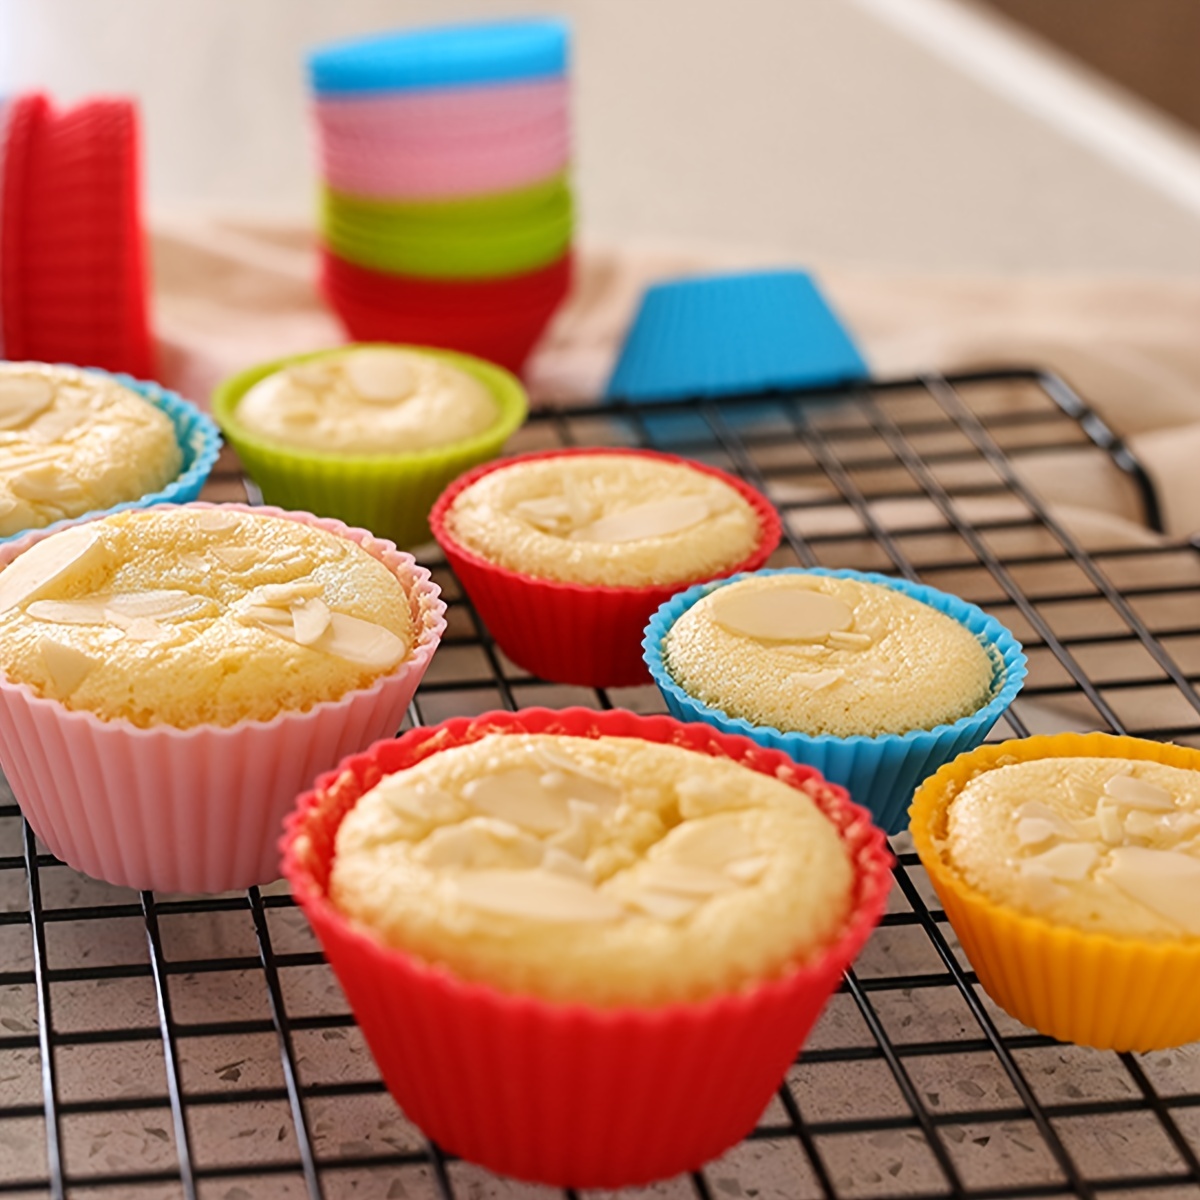 12pcs, Reusable Silicone Cupcake Pans - Perfect for Baking Muffins, Cakes,  and More!